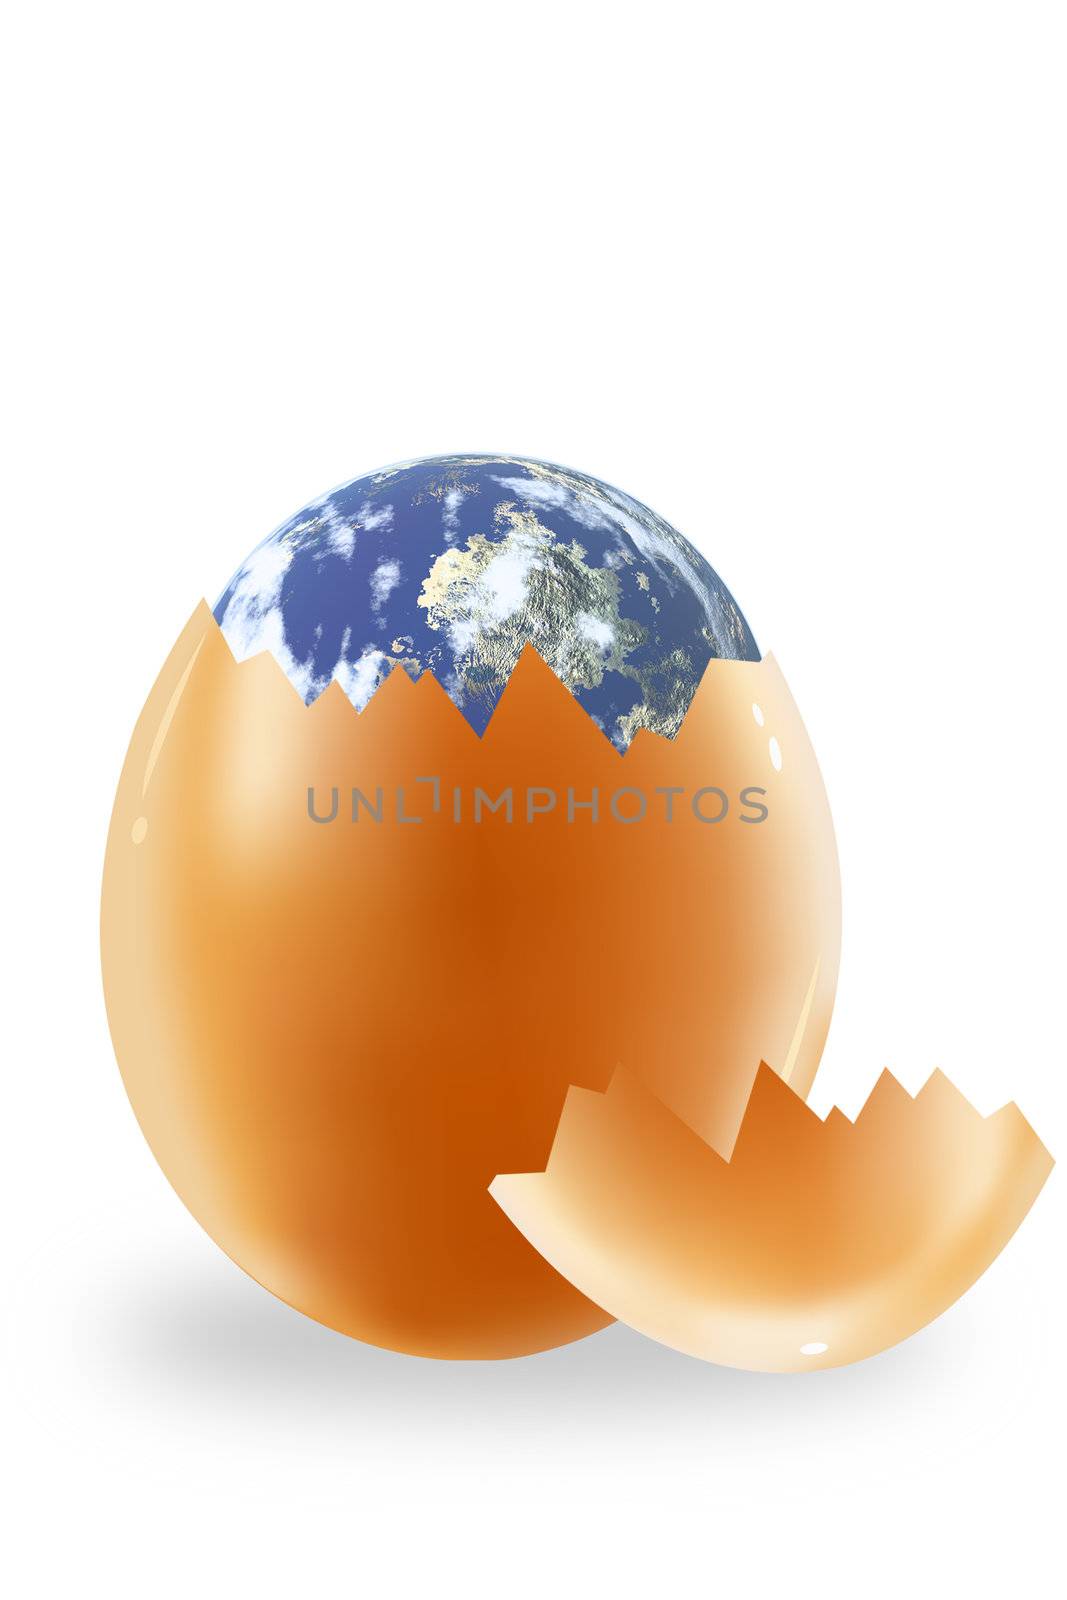 Egg and the Earth on a white background